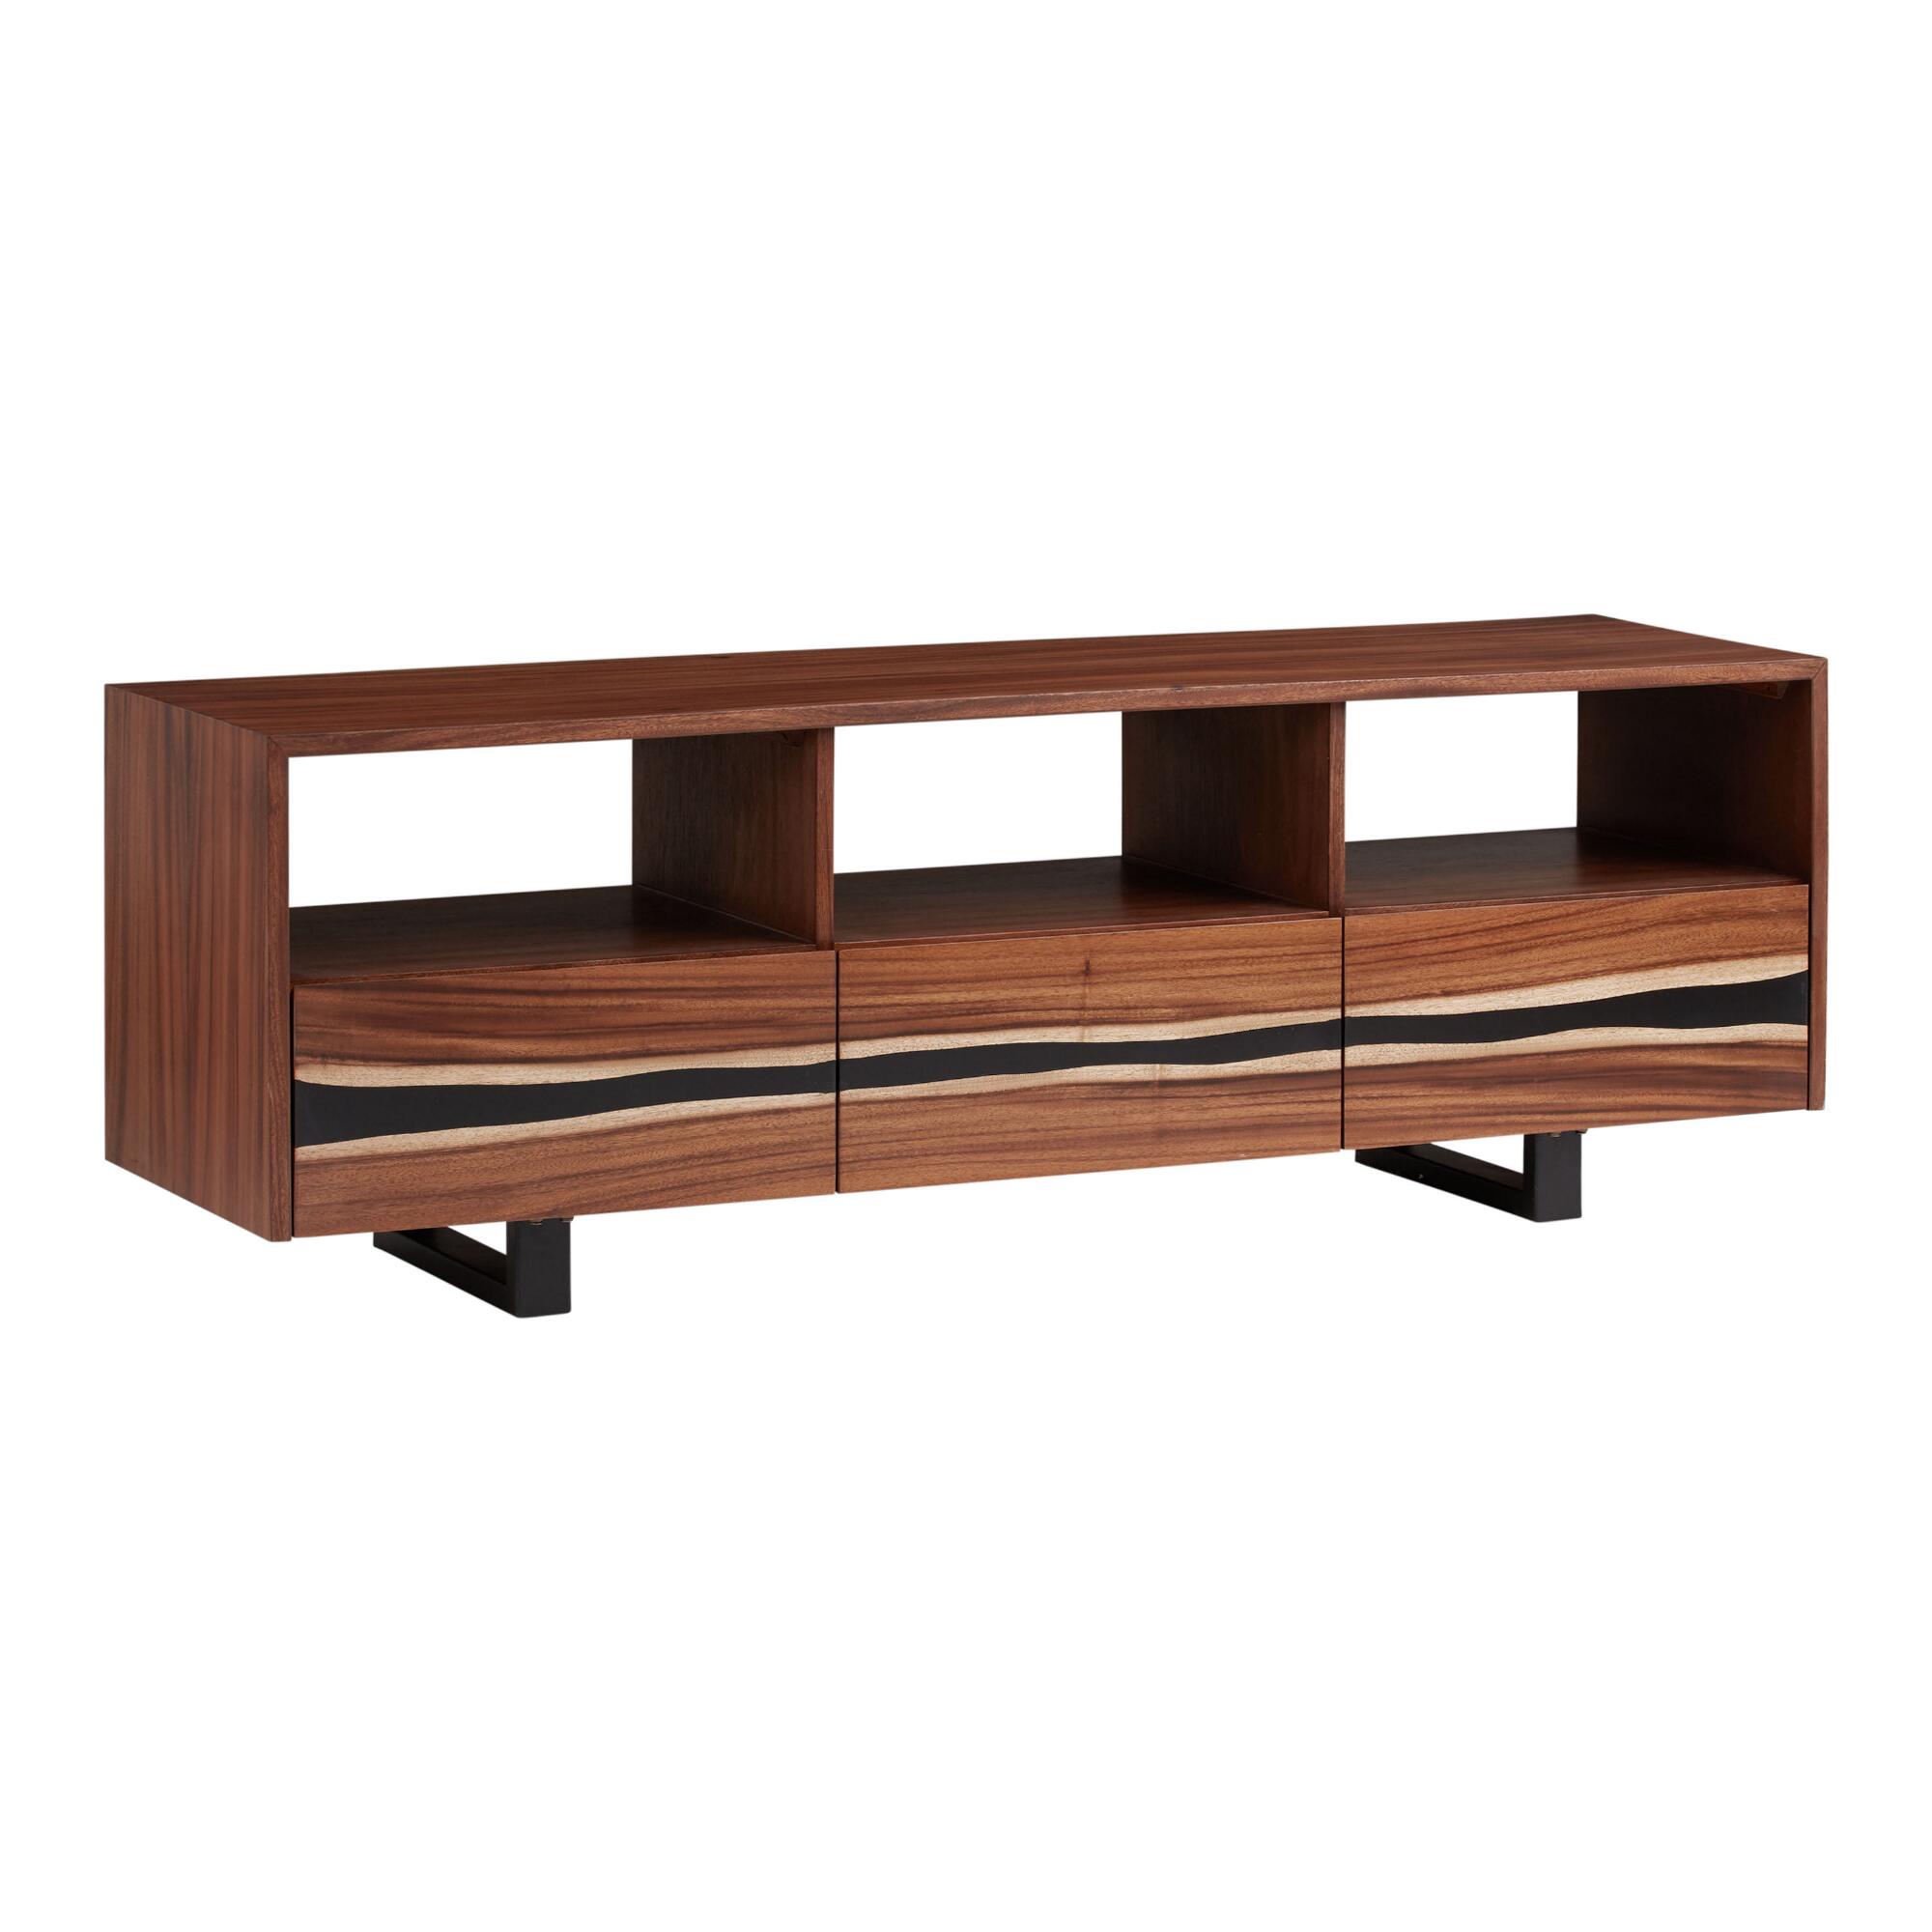 Live Edge Wood and Resin Cailen Media Stand: Brown by World Market